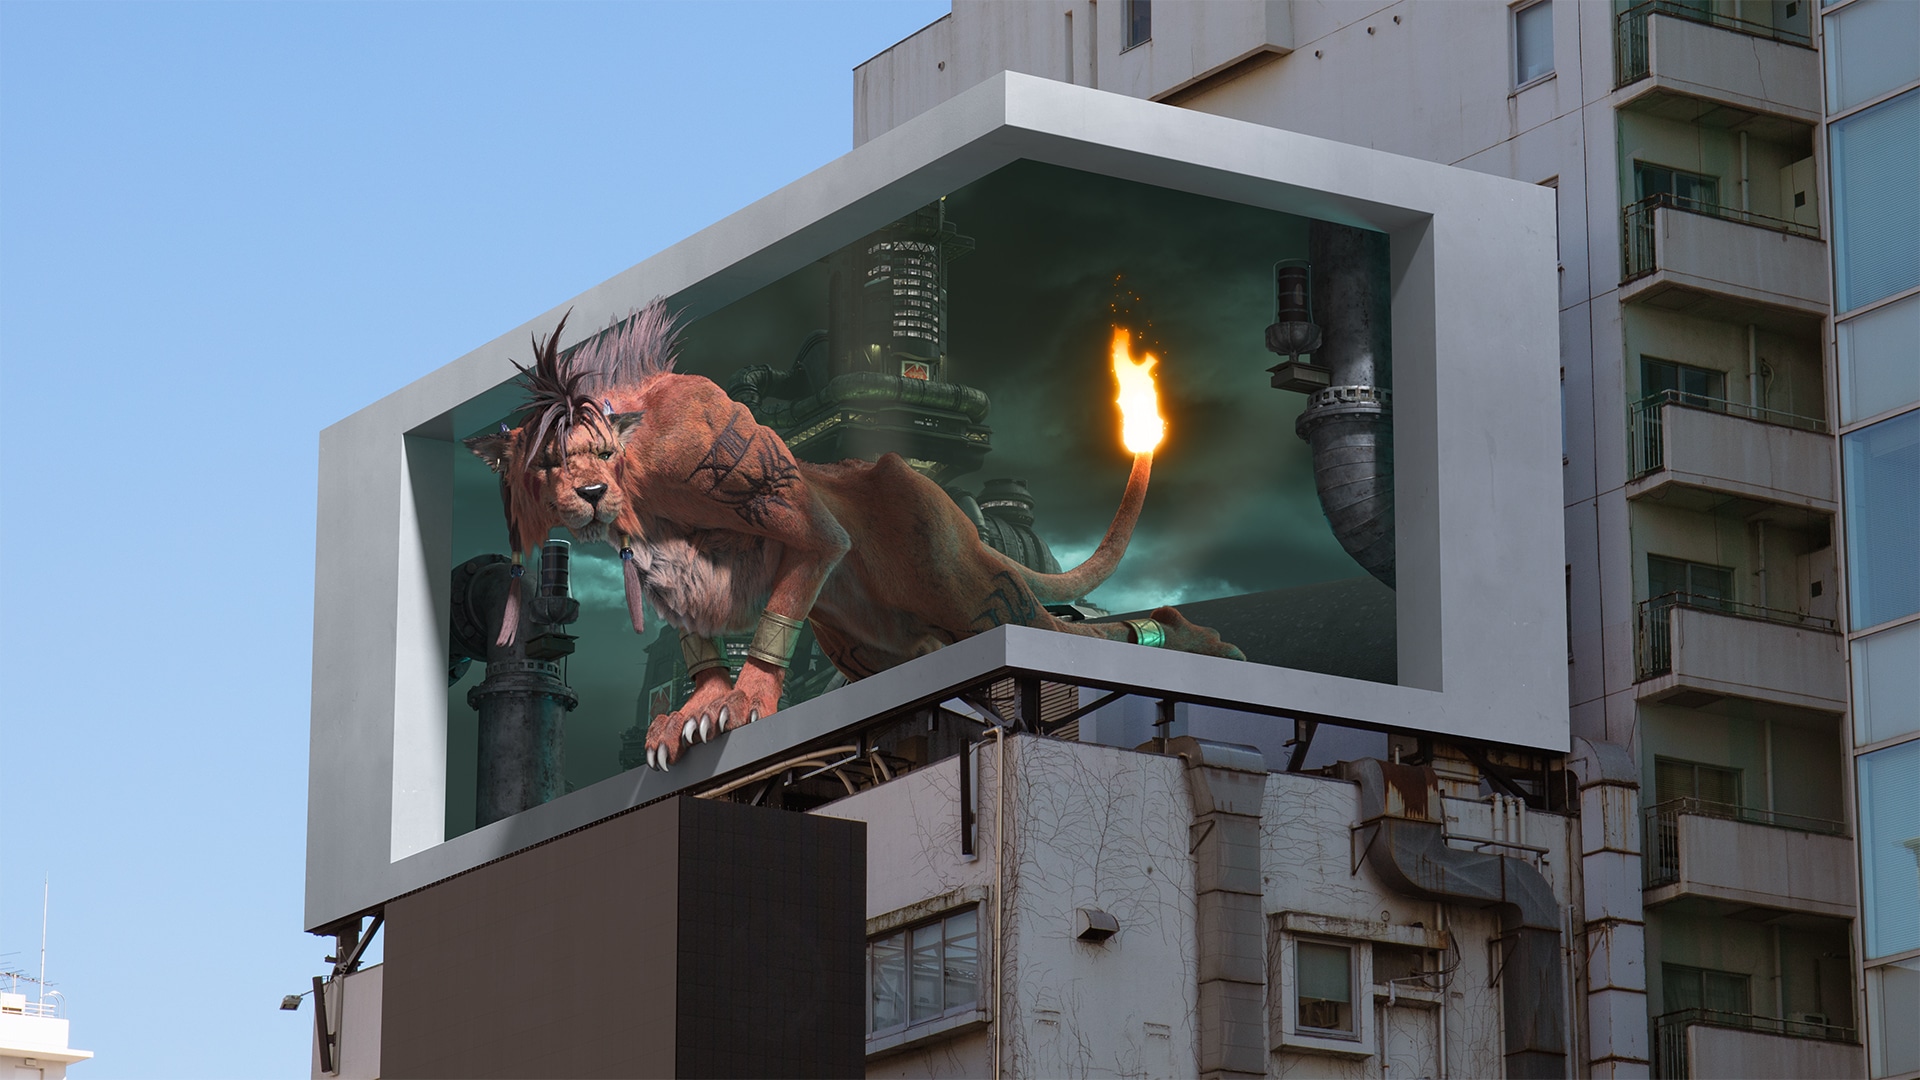 The Cuddlesome Red XIII Will Appear On A Billboard At Omotesando; Merchandise Giveaway Campaign